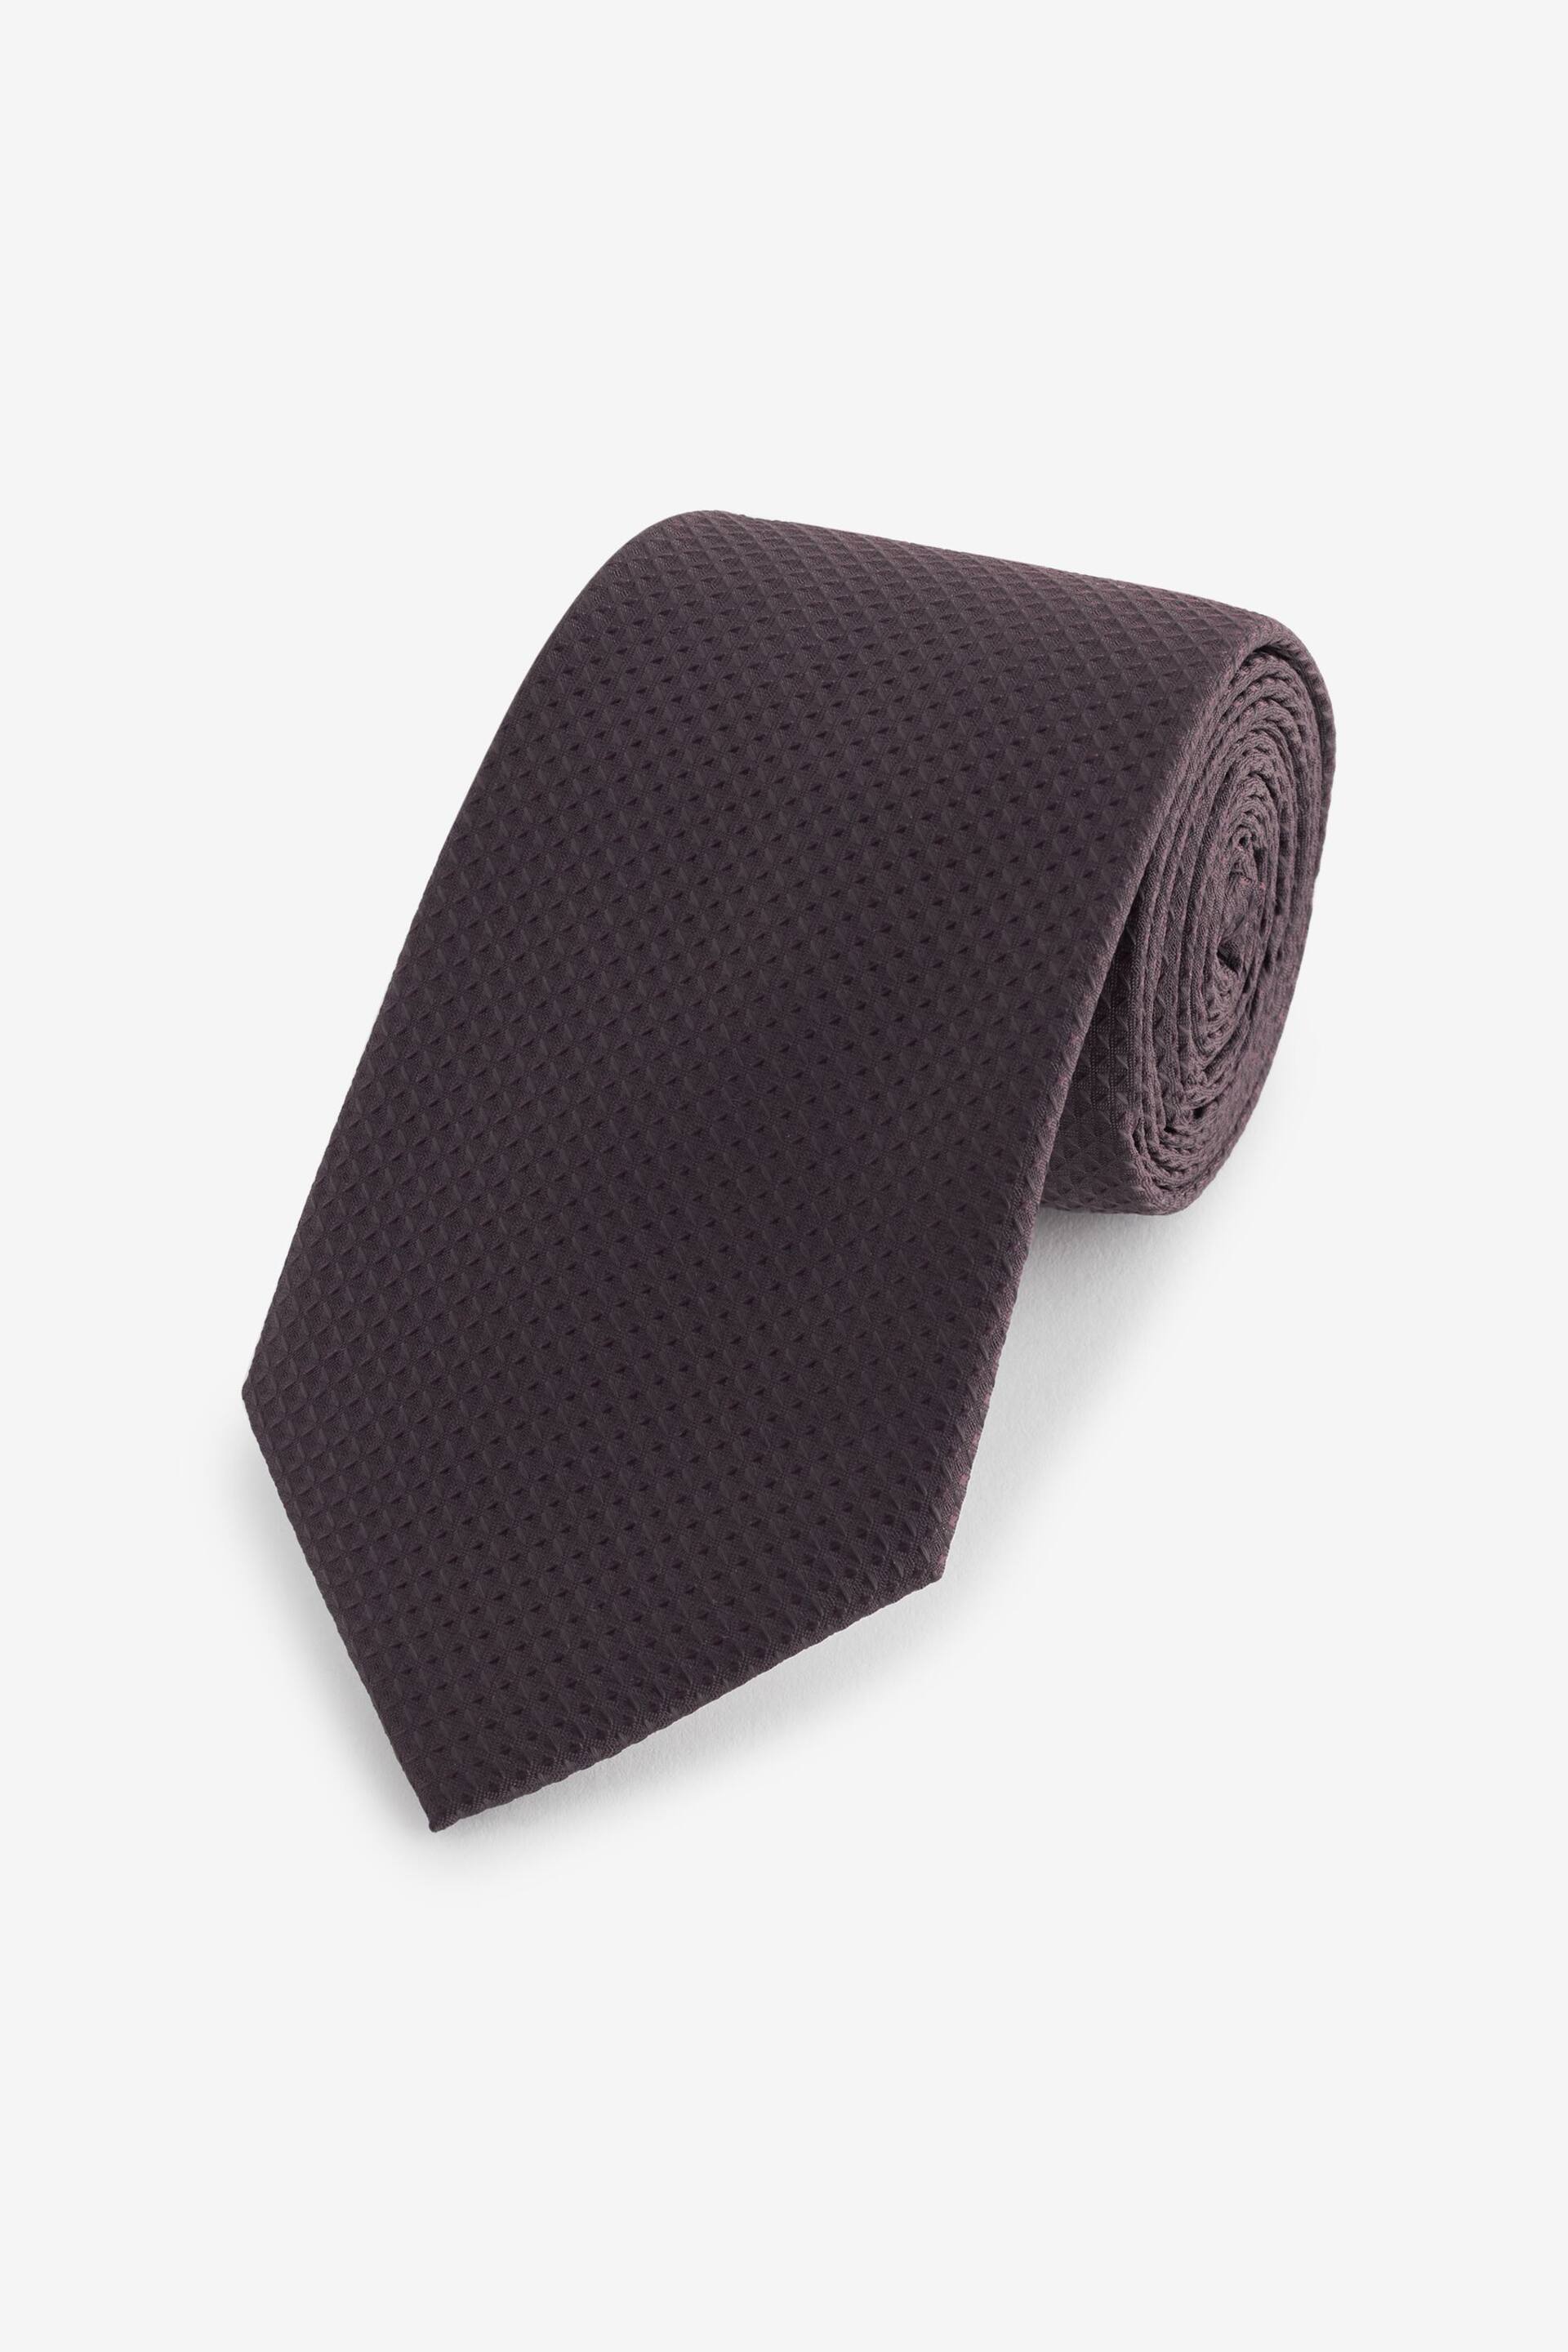 Chocolate Brown Waffle Textured Tie - Image 1 of 3